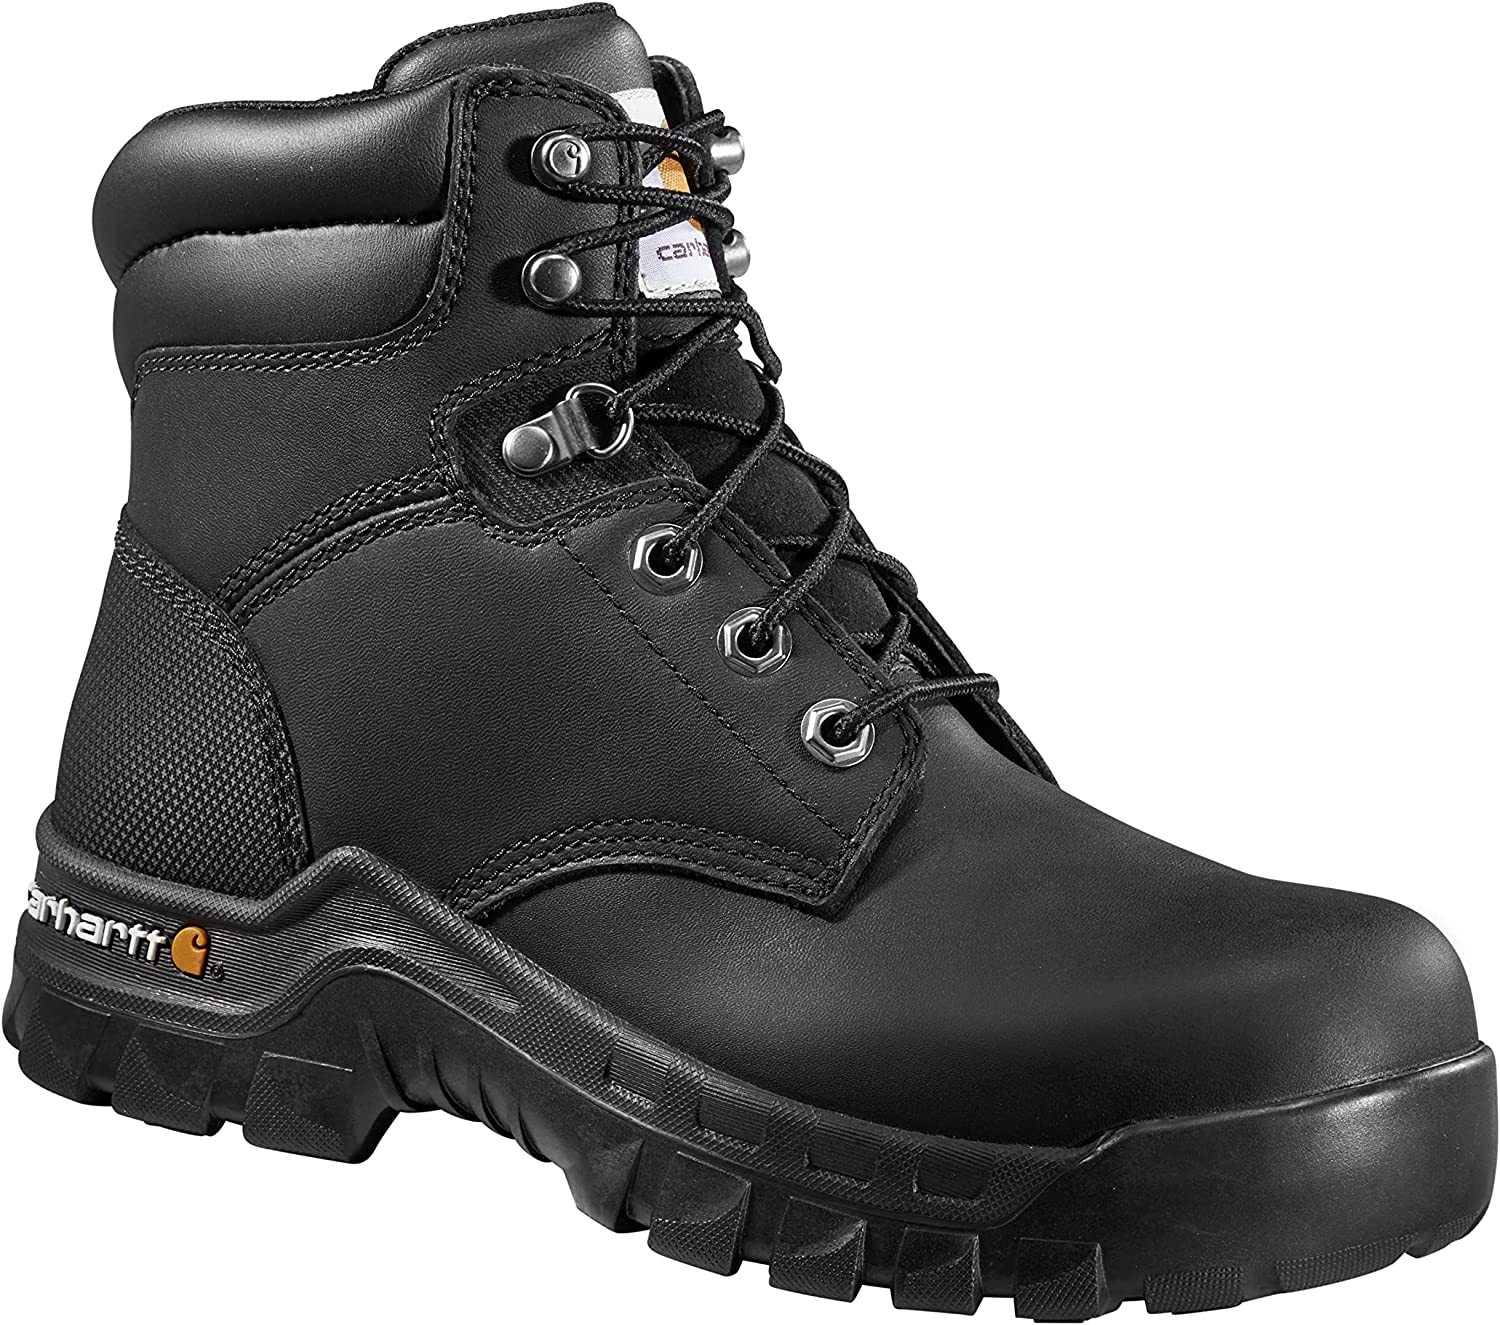 Rugged Flex 6" Composite Toe Work Boot in Black Oil Tanned from the size view